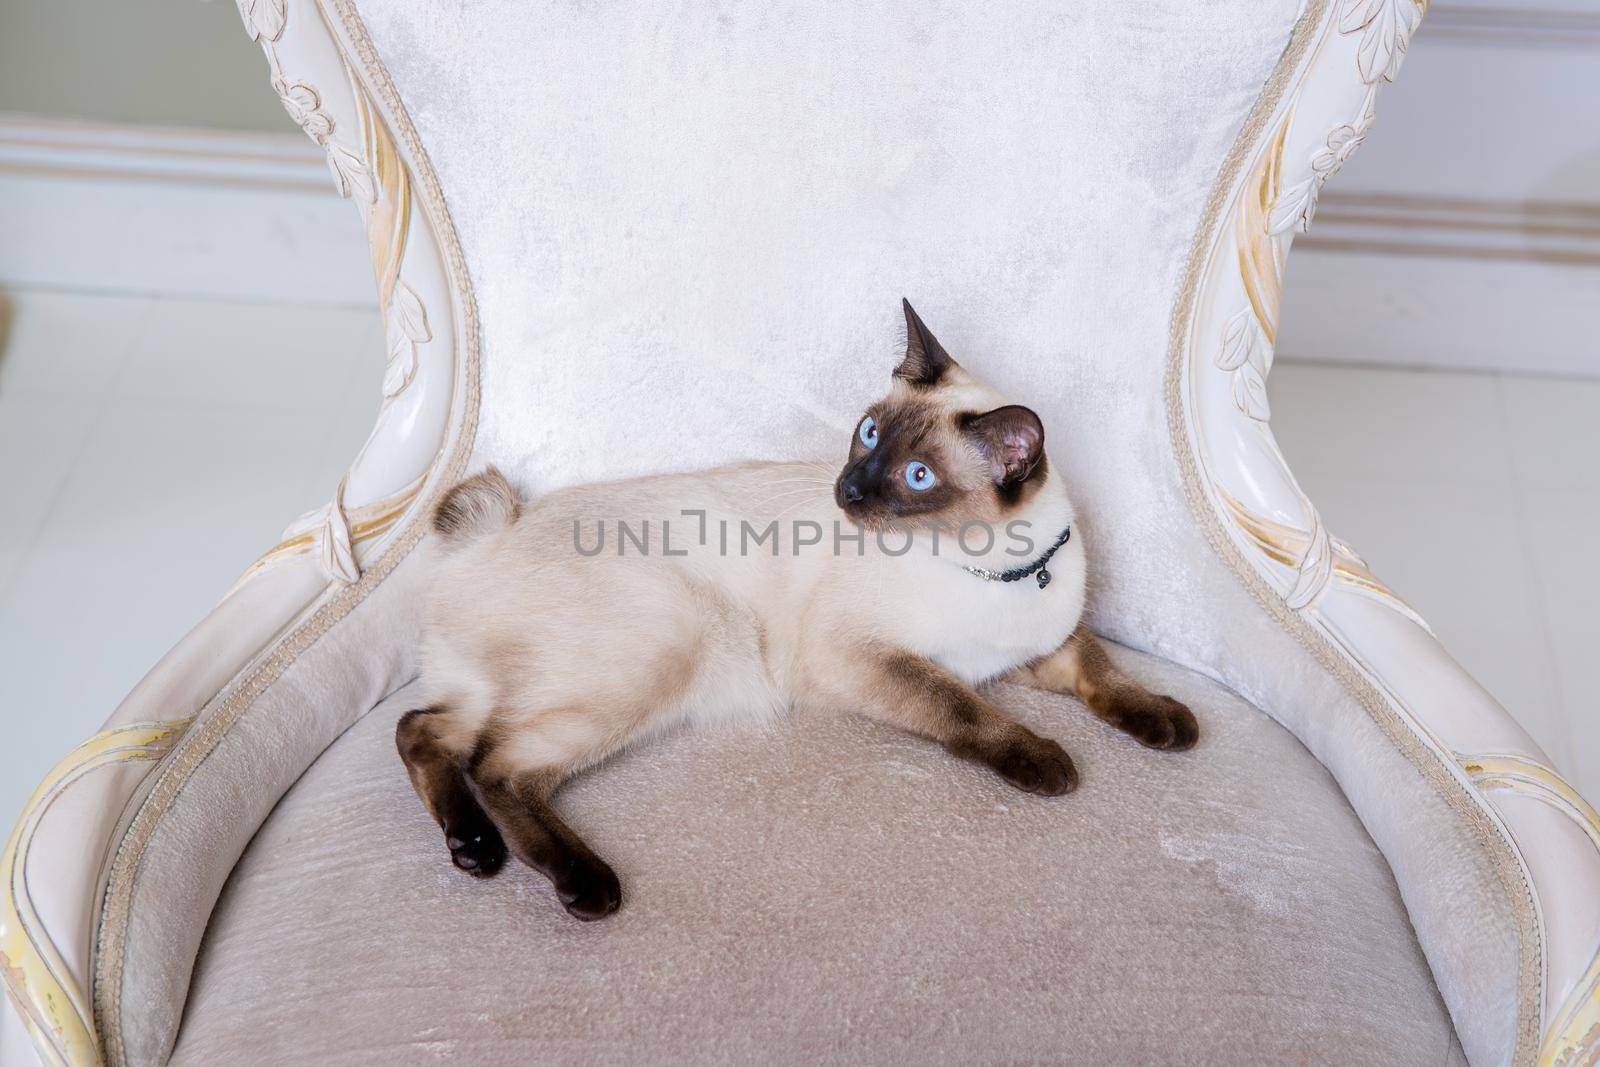 The theme of wealth and luxury. The impudent narcissistic cat of breed Mekong Bobtail poses on a vinage chair in an expensive interior. Thai cat with no tail and jewelry. Decoration on the neck.